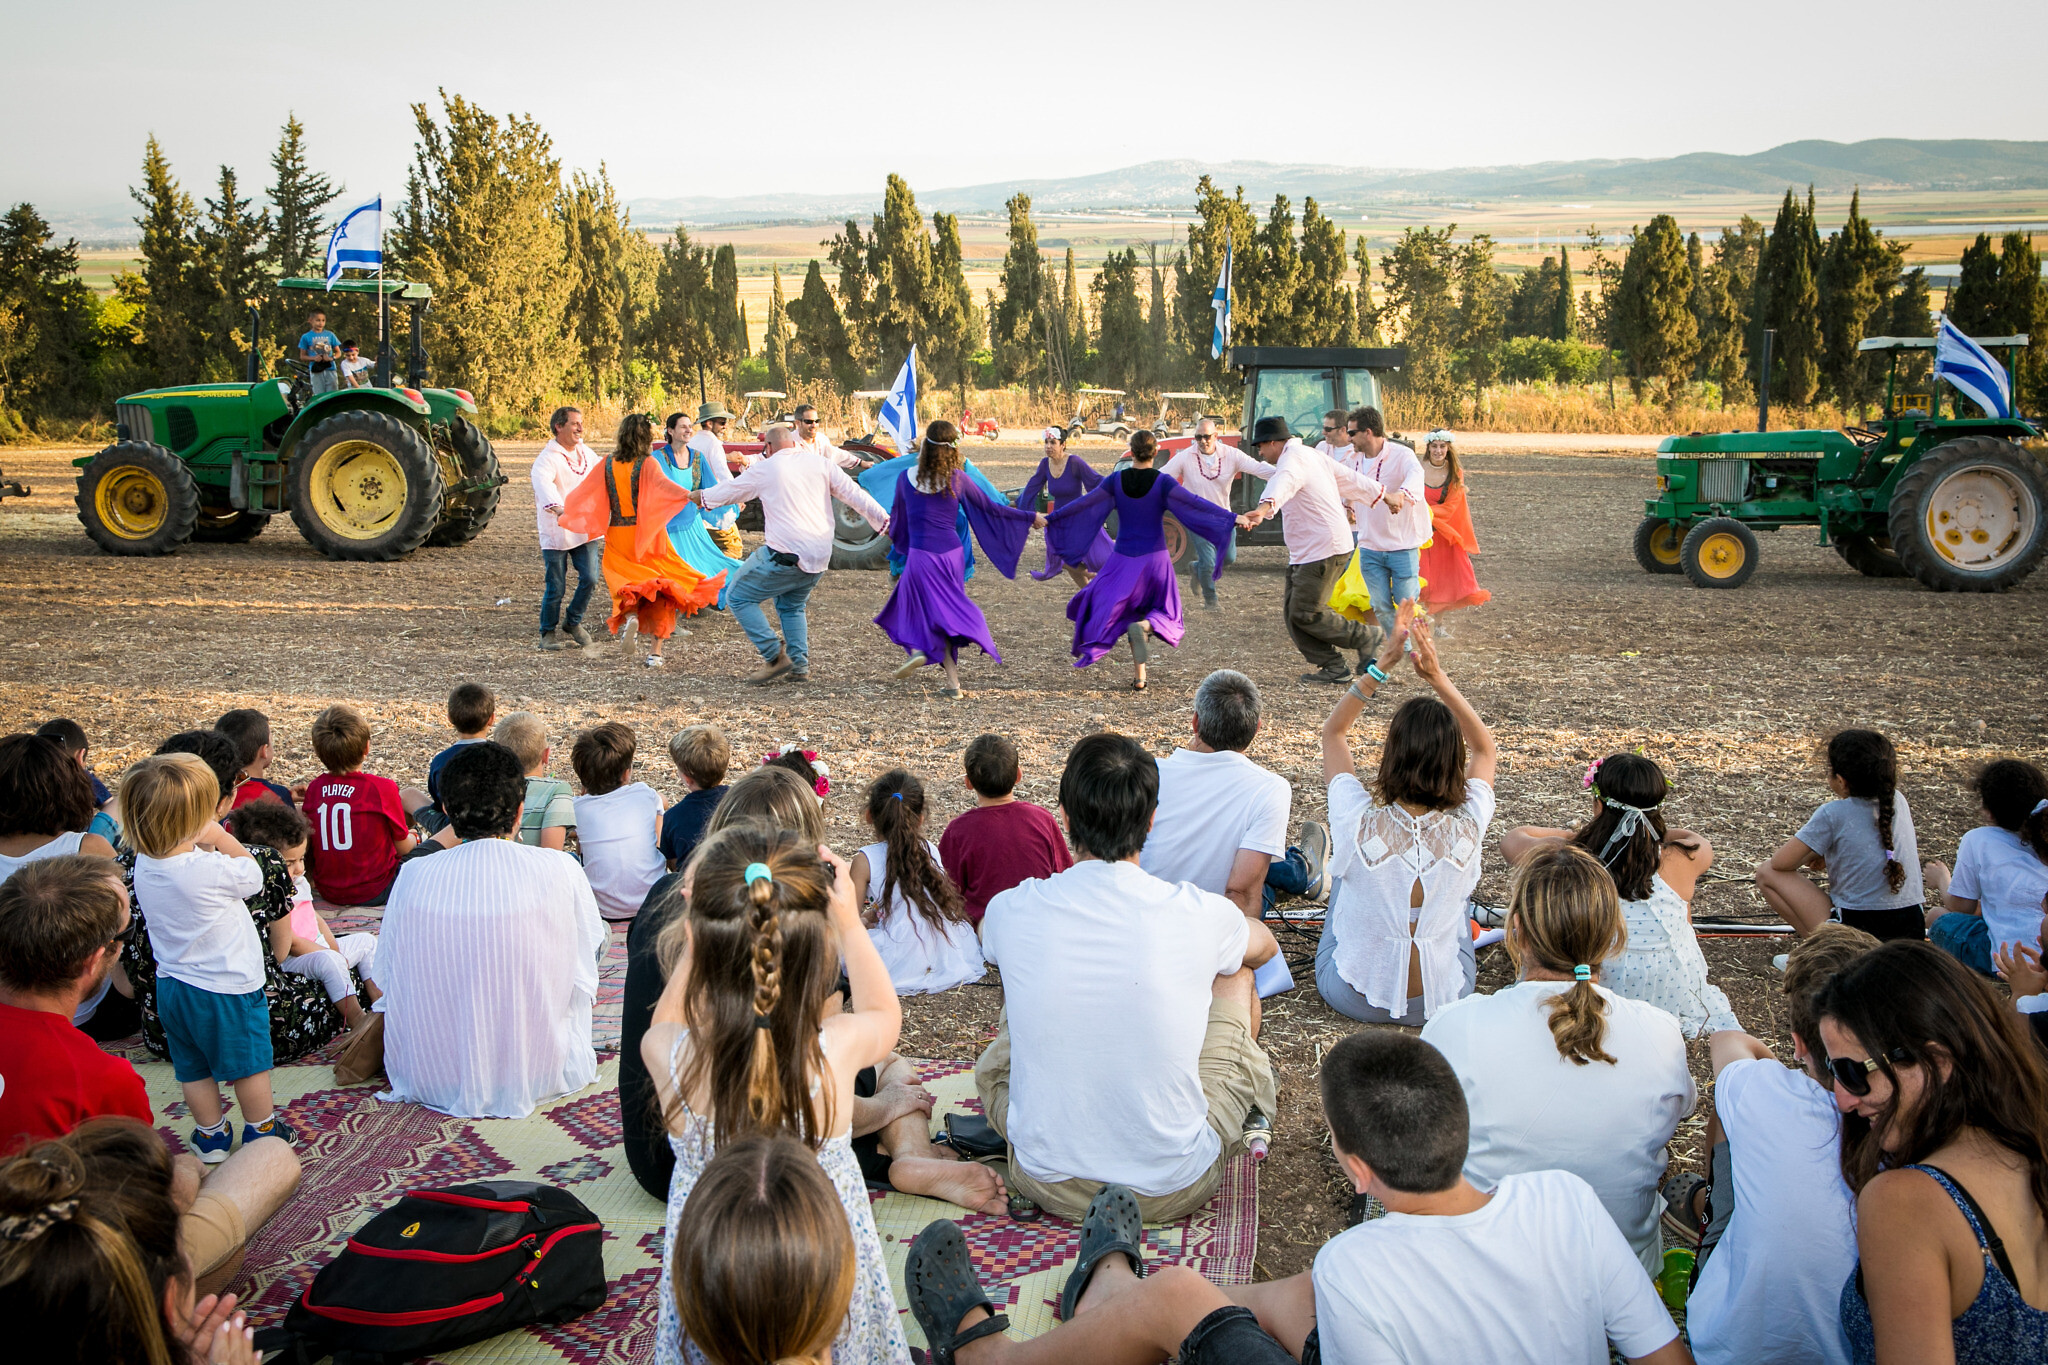 On the kibbutz, Shavuot is a time for remembering the movement’s glory